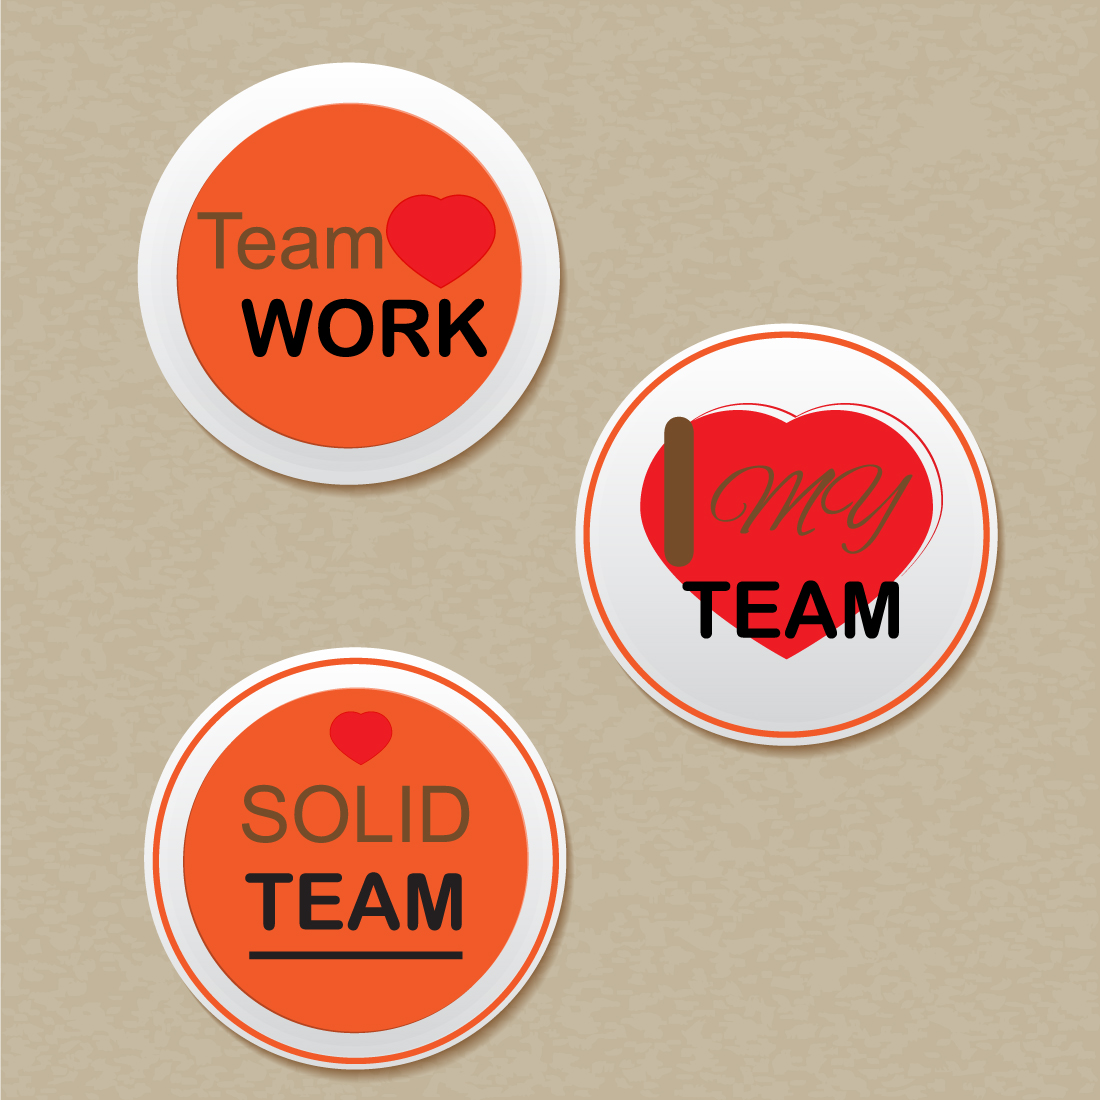 I Love My Team Badge preview image.